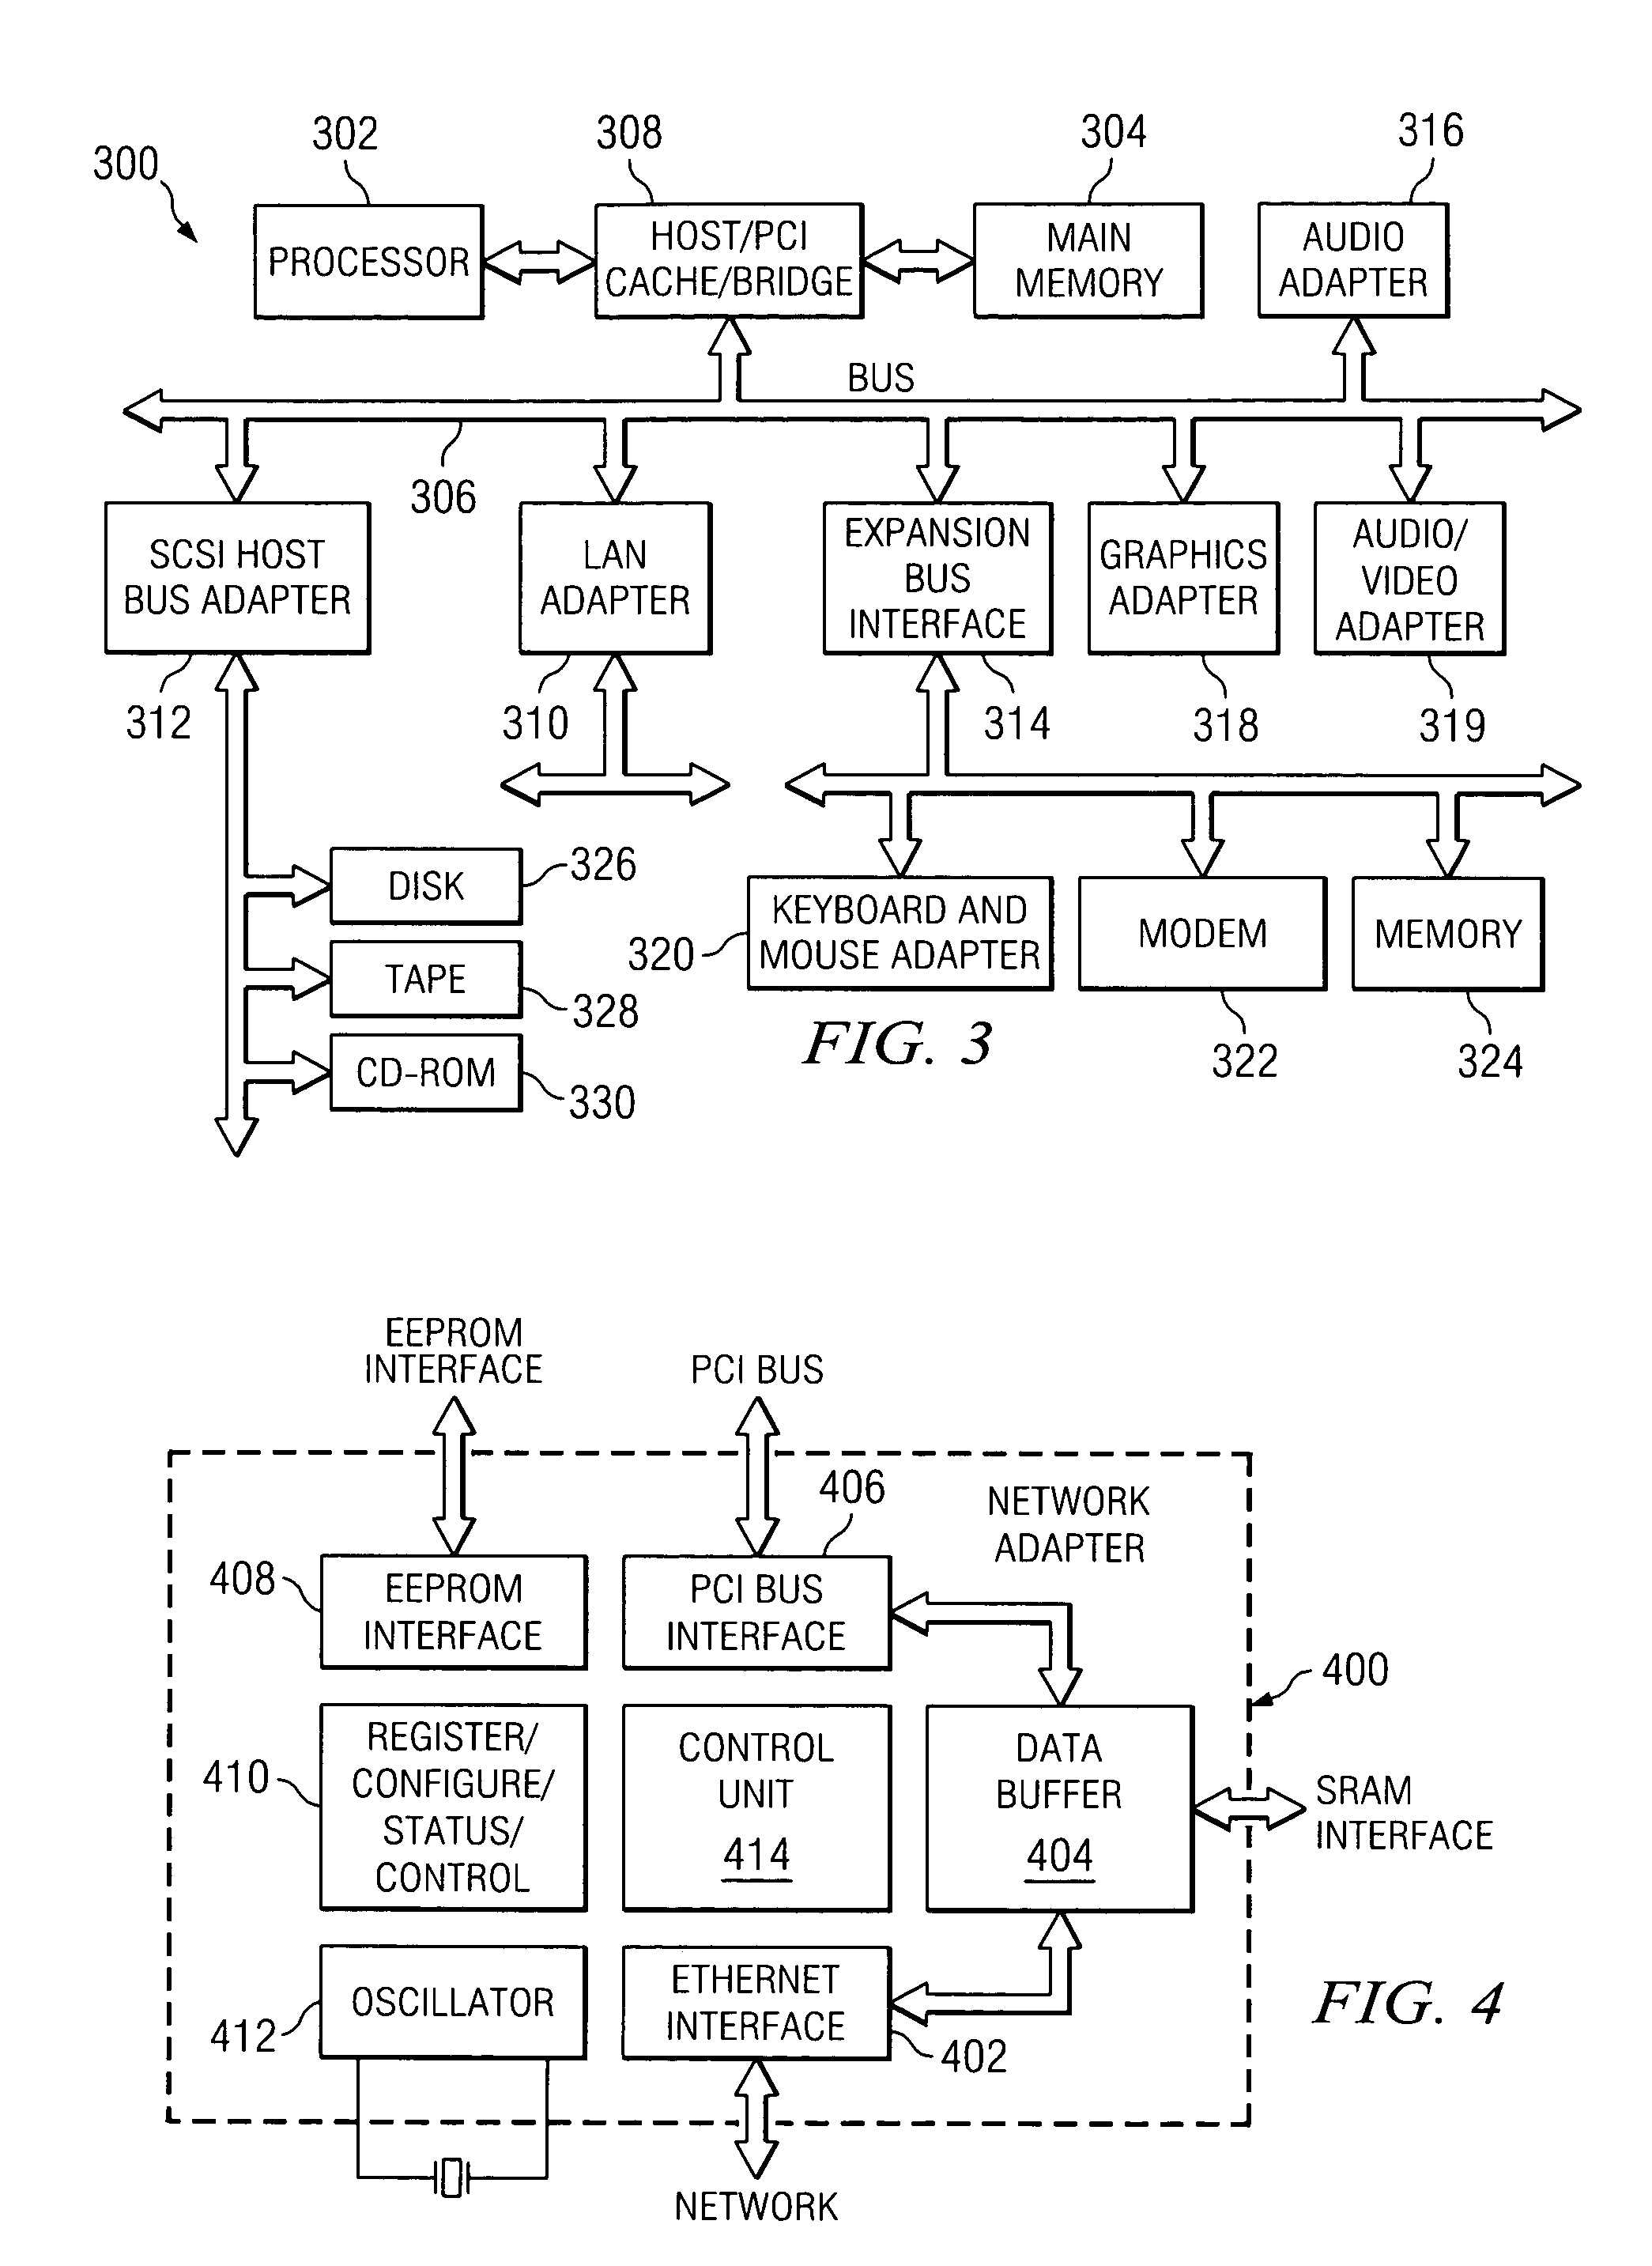 Apparatus and method for supporting received data processing in an offload of network protocol processing